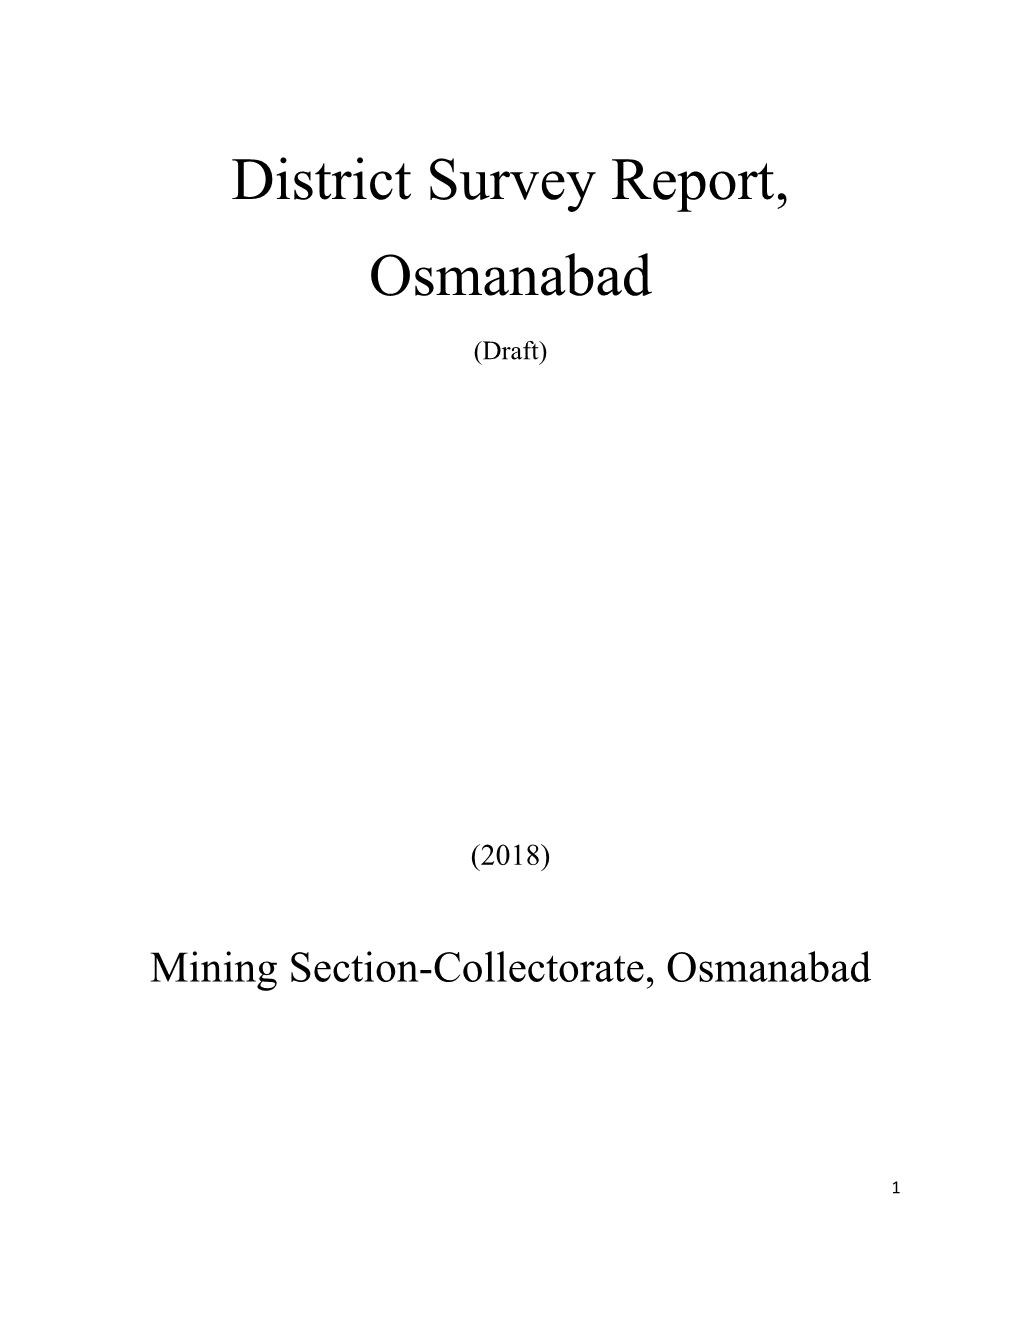 District Survey Report, Osmanabad